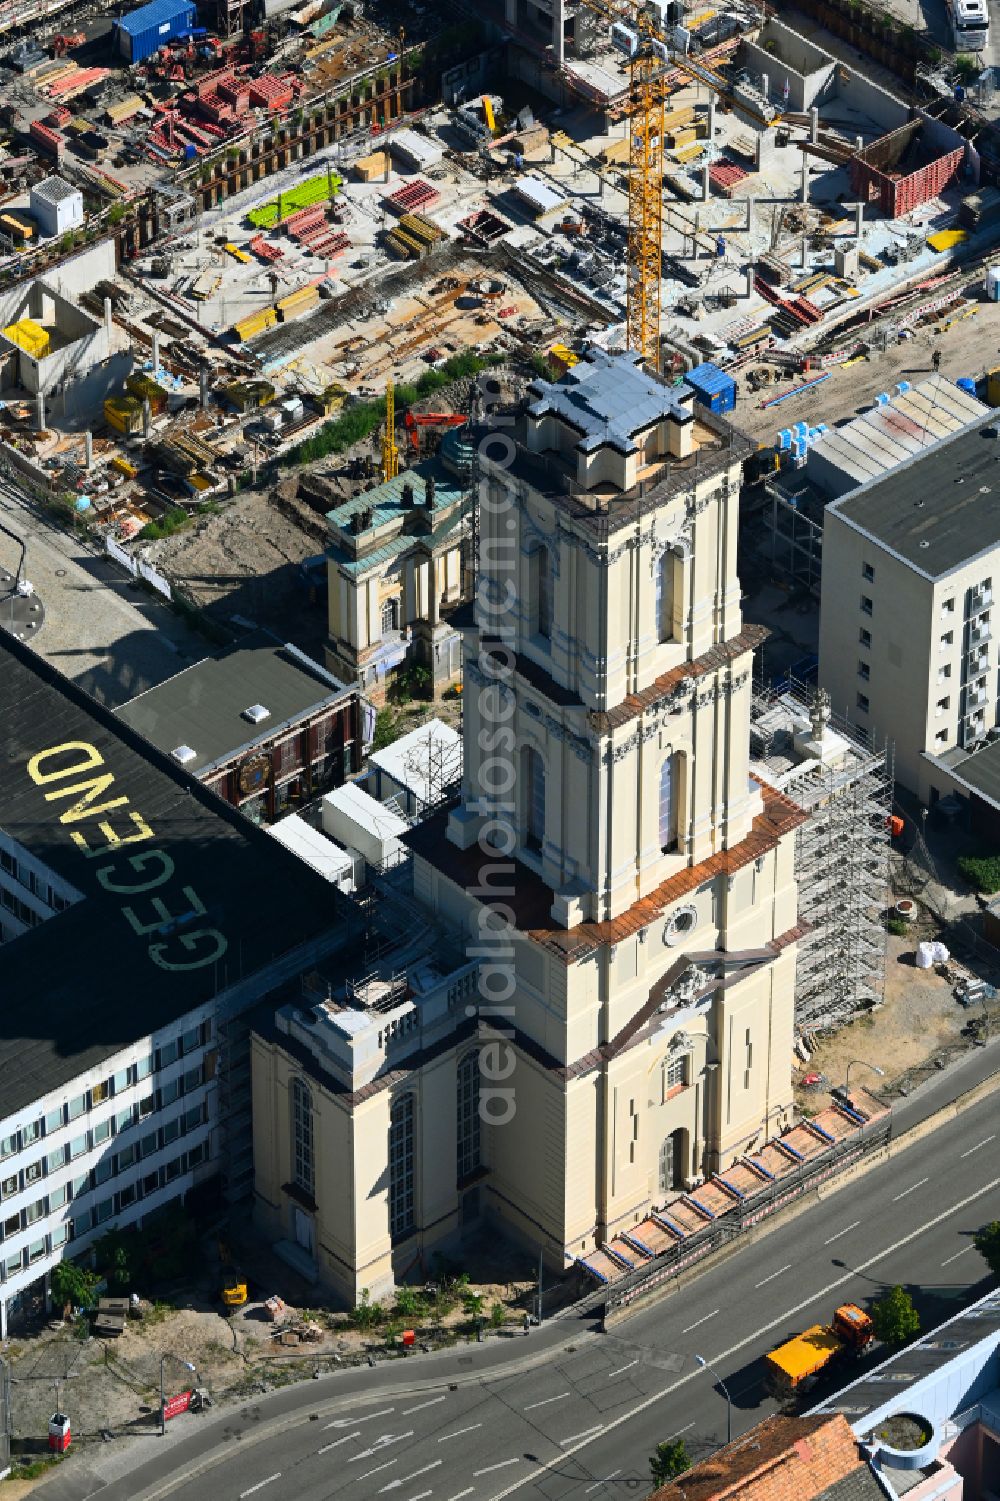 Aerial image Potsdam - Construction site for the reconstruction of the Garnisonkirche Potsdam in Potsdam in the federal state of Brandenburg, Germany